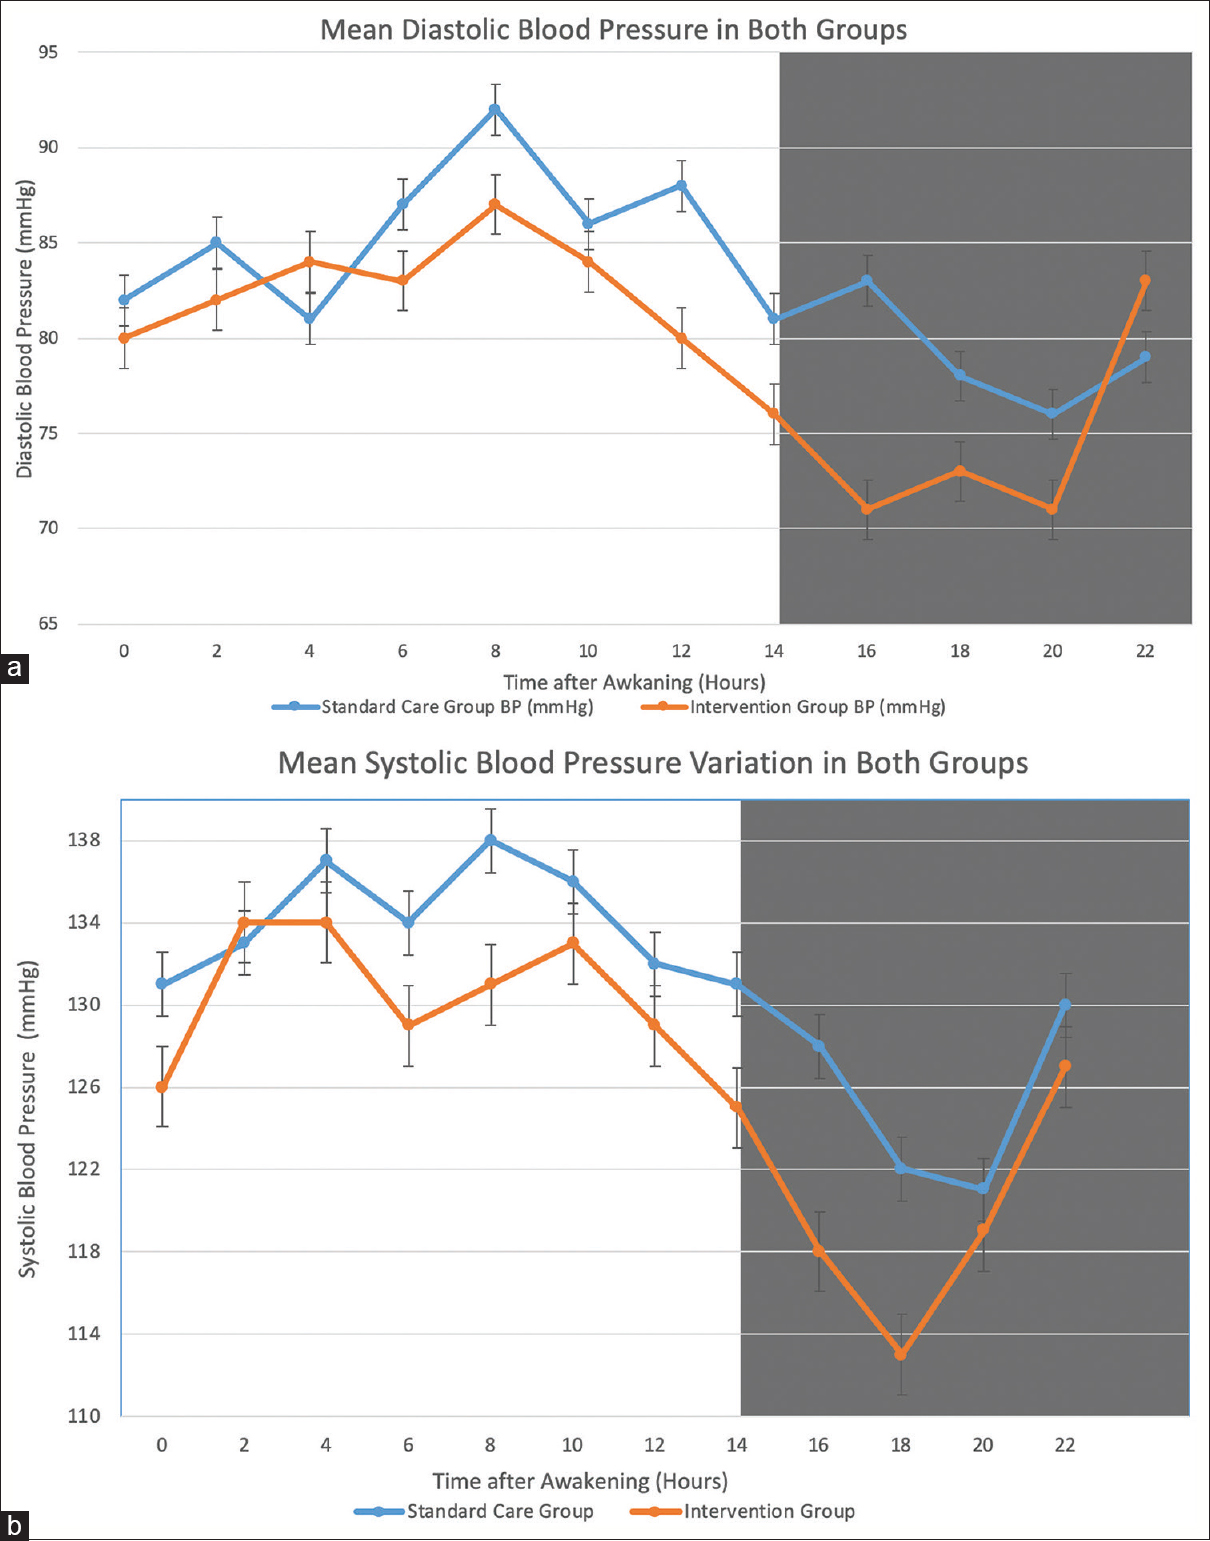 (a and b) Changes in the circadian pattern of SBP and DBP between Intervention and Standard care group in CKD patients sampled 24-h ABPM. Each graph shows the 2 hourly means and SEs of data collected from the standard care group (Blue line) and intervention group (Orange line) after 12 weeks of treatment. Dark shading along the graphs represents the average hours of nocturnal sleep across the patient sample